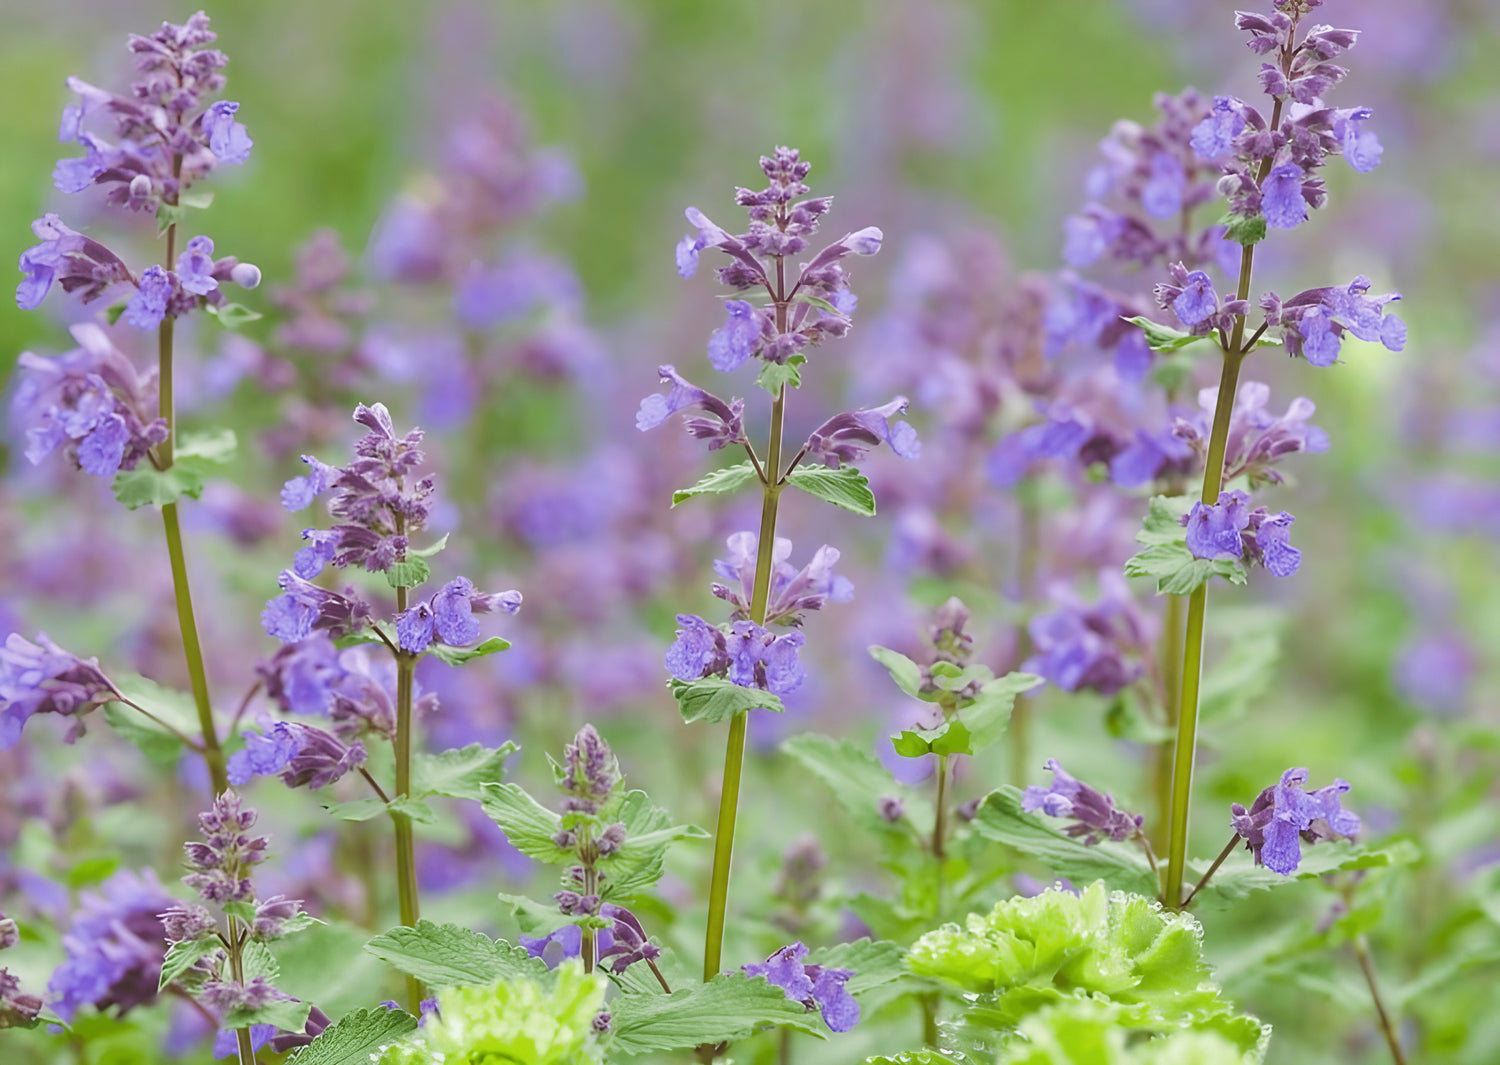 Nepeta Mussinii Catmint plant showcasing a spread of purple flowers and lush green foliage